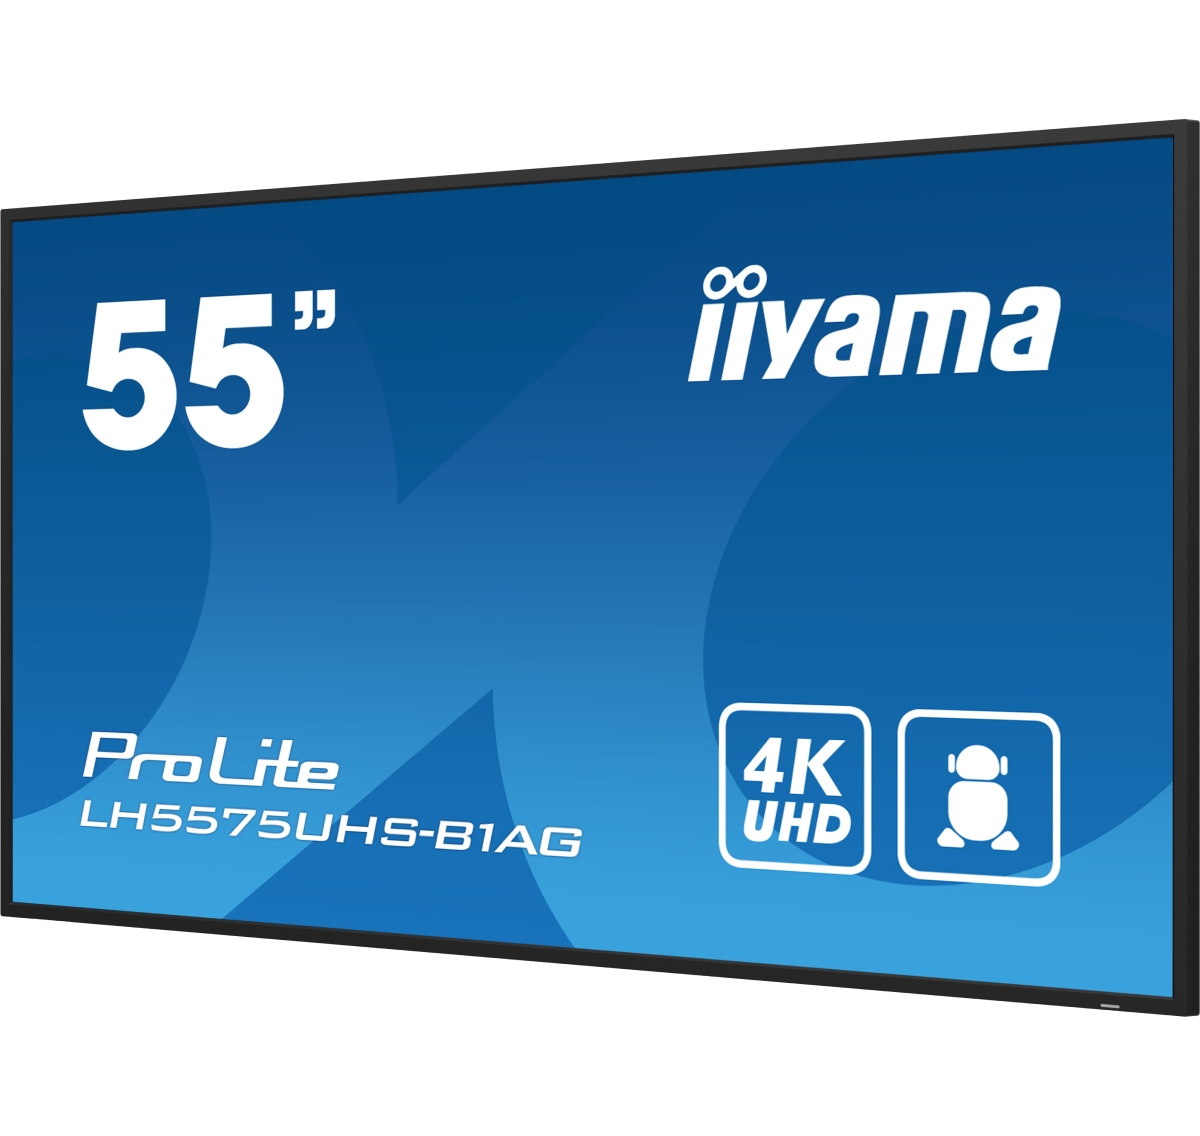 Iiyama LH5575UHS-B1AG - 54.6" 4K IPS Android RJ45/WIFI (LH5575UHS-B1AG) - Achat / Vente Affichage dynamique sur grosbill-pro.com - 1